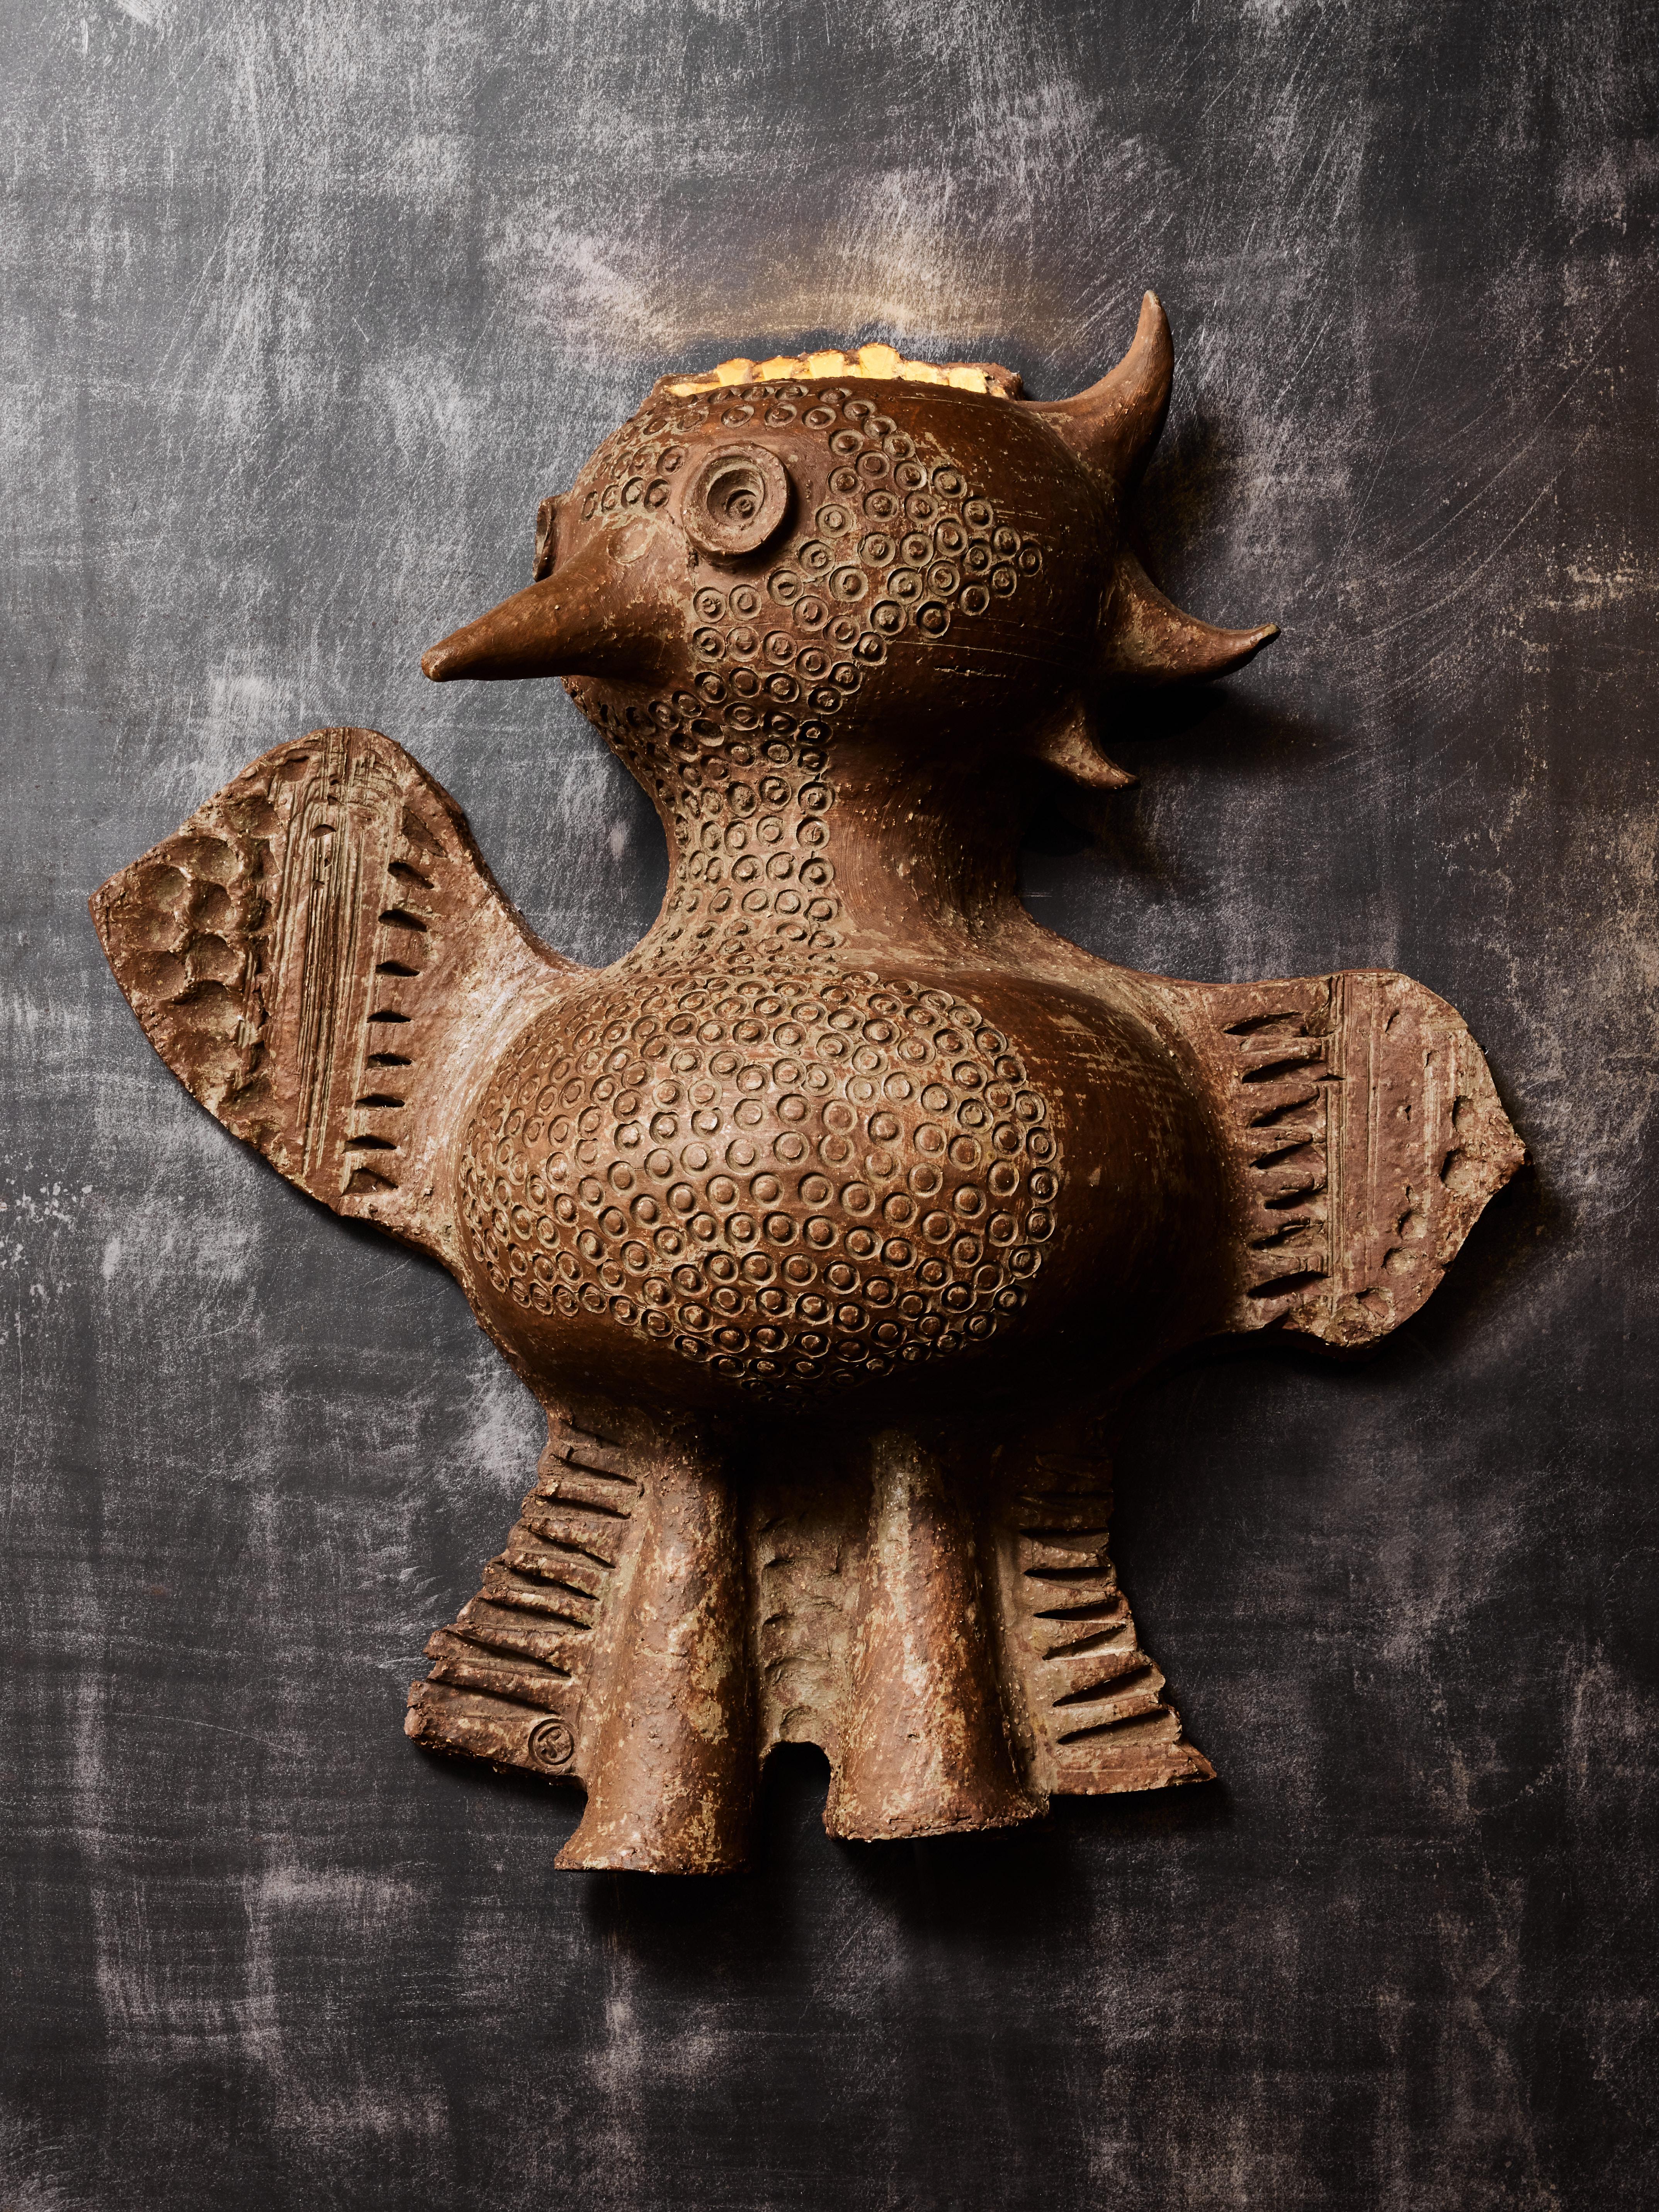 Impressive wall sconce by the French ceramist Jacques Pouchain made of red ceramic, shaped like a mystical bird. Stamp of the artist on one of the wing.

Jacques Pouchain (1927-2015)
Painter, sculptor and ceramist, best known for his ceramics